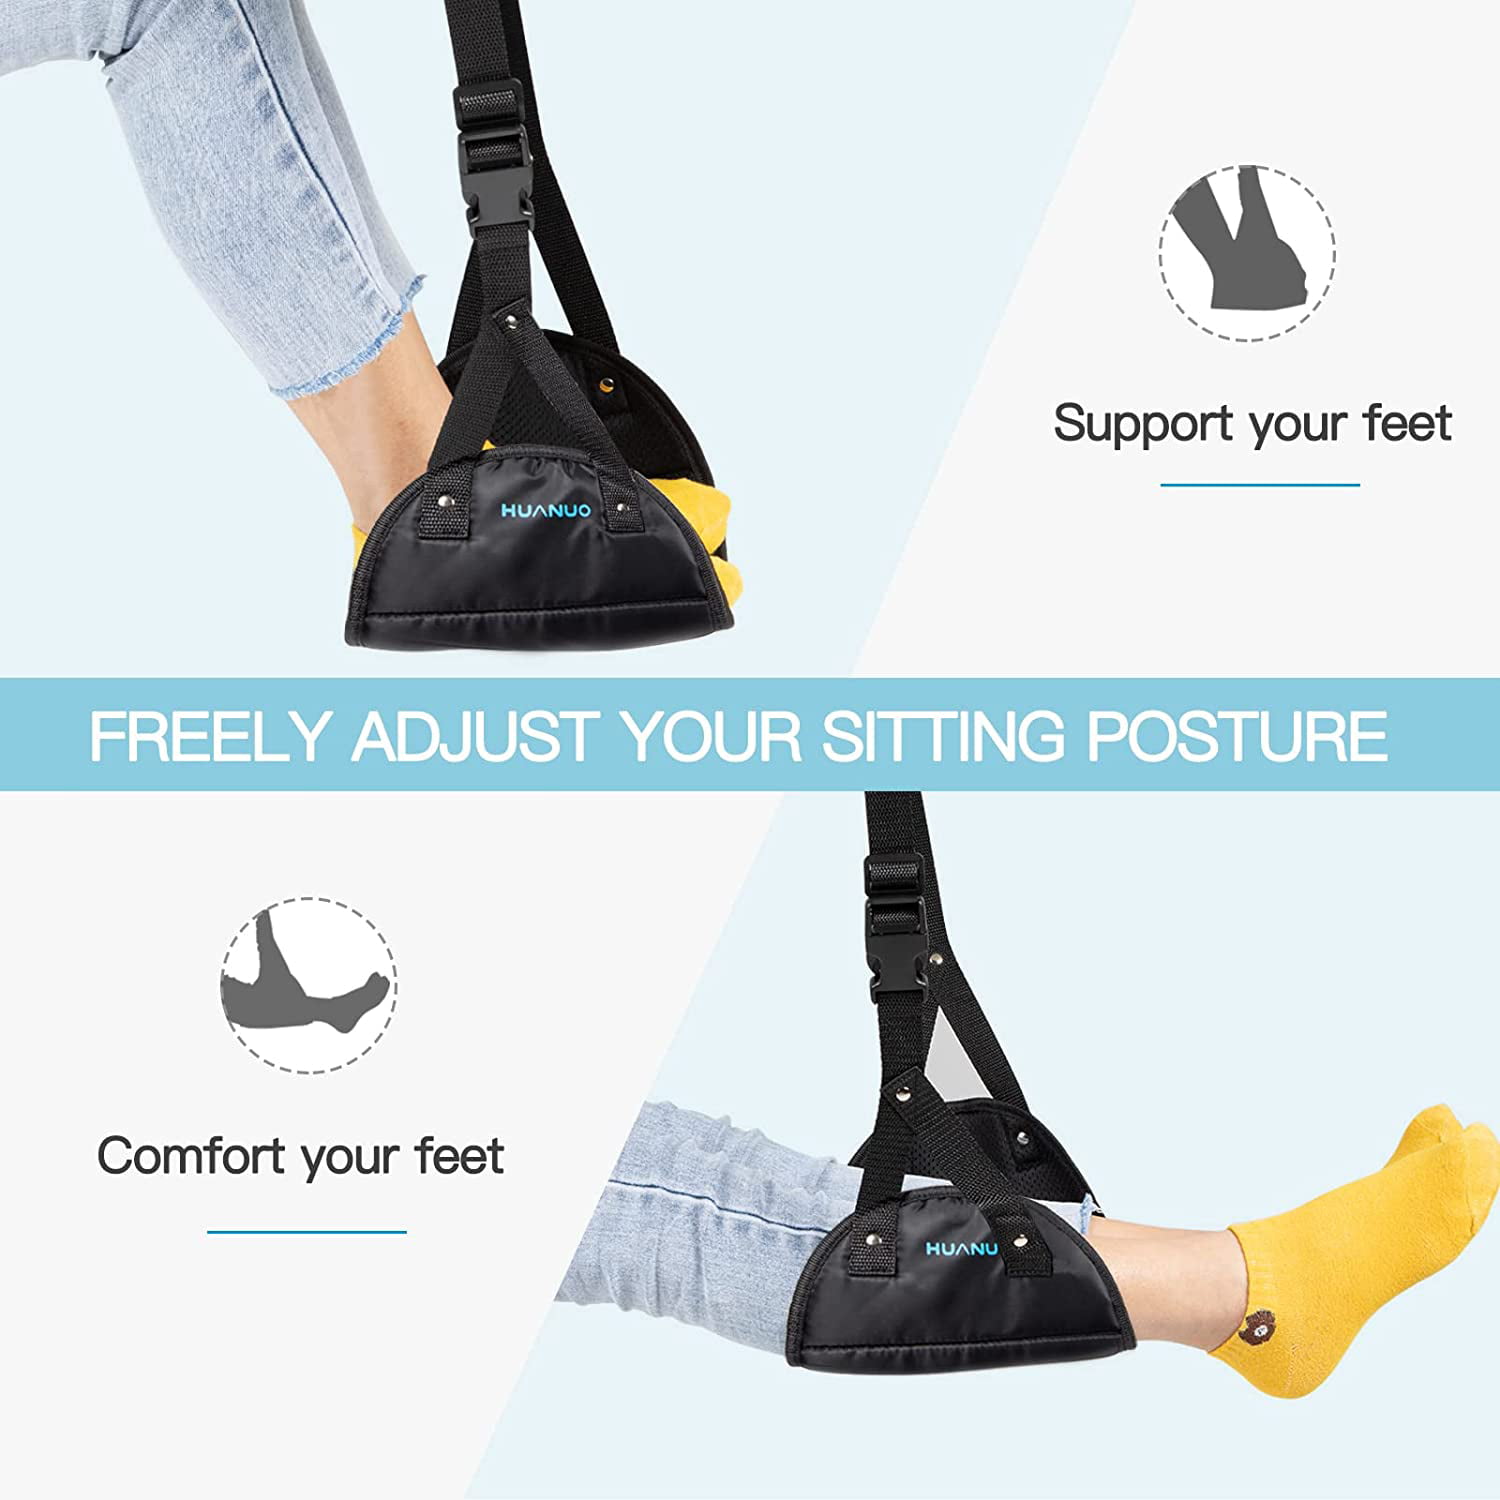 Airplane Travel Accessories Airplane Footrest, Travel Comfort Prevent Lower Back Pain 2-Pack Foot Rest hammock with Premium Memory Foam Stiffness and Swelling Foot Rest Airplane By Rest Well 